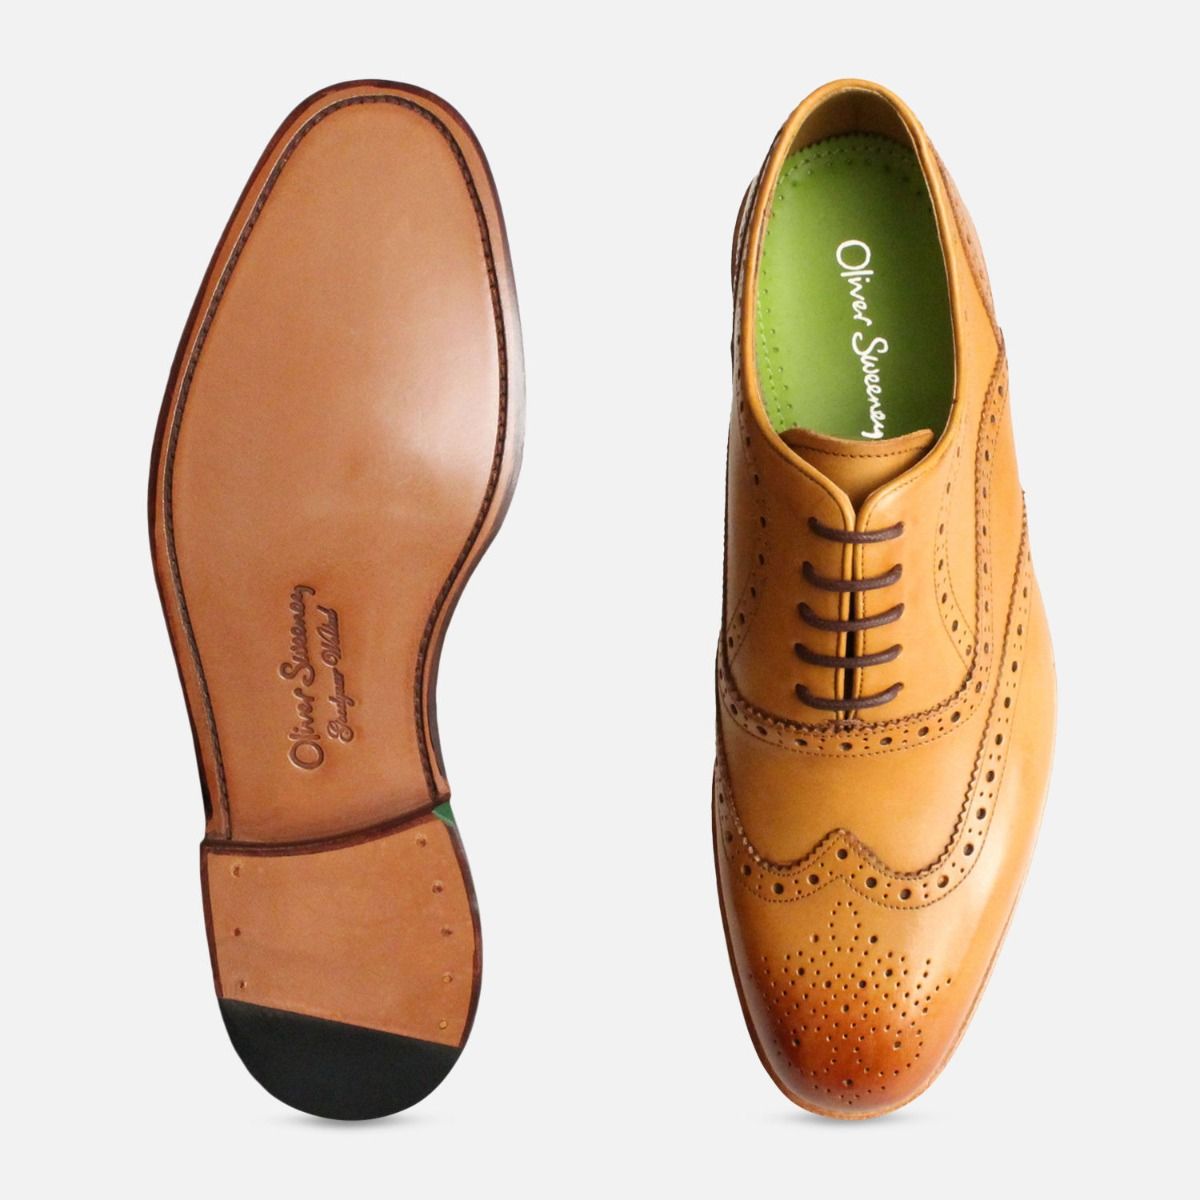 Oliver Sweeney Wingcap Oxford Brogues in Tan